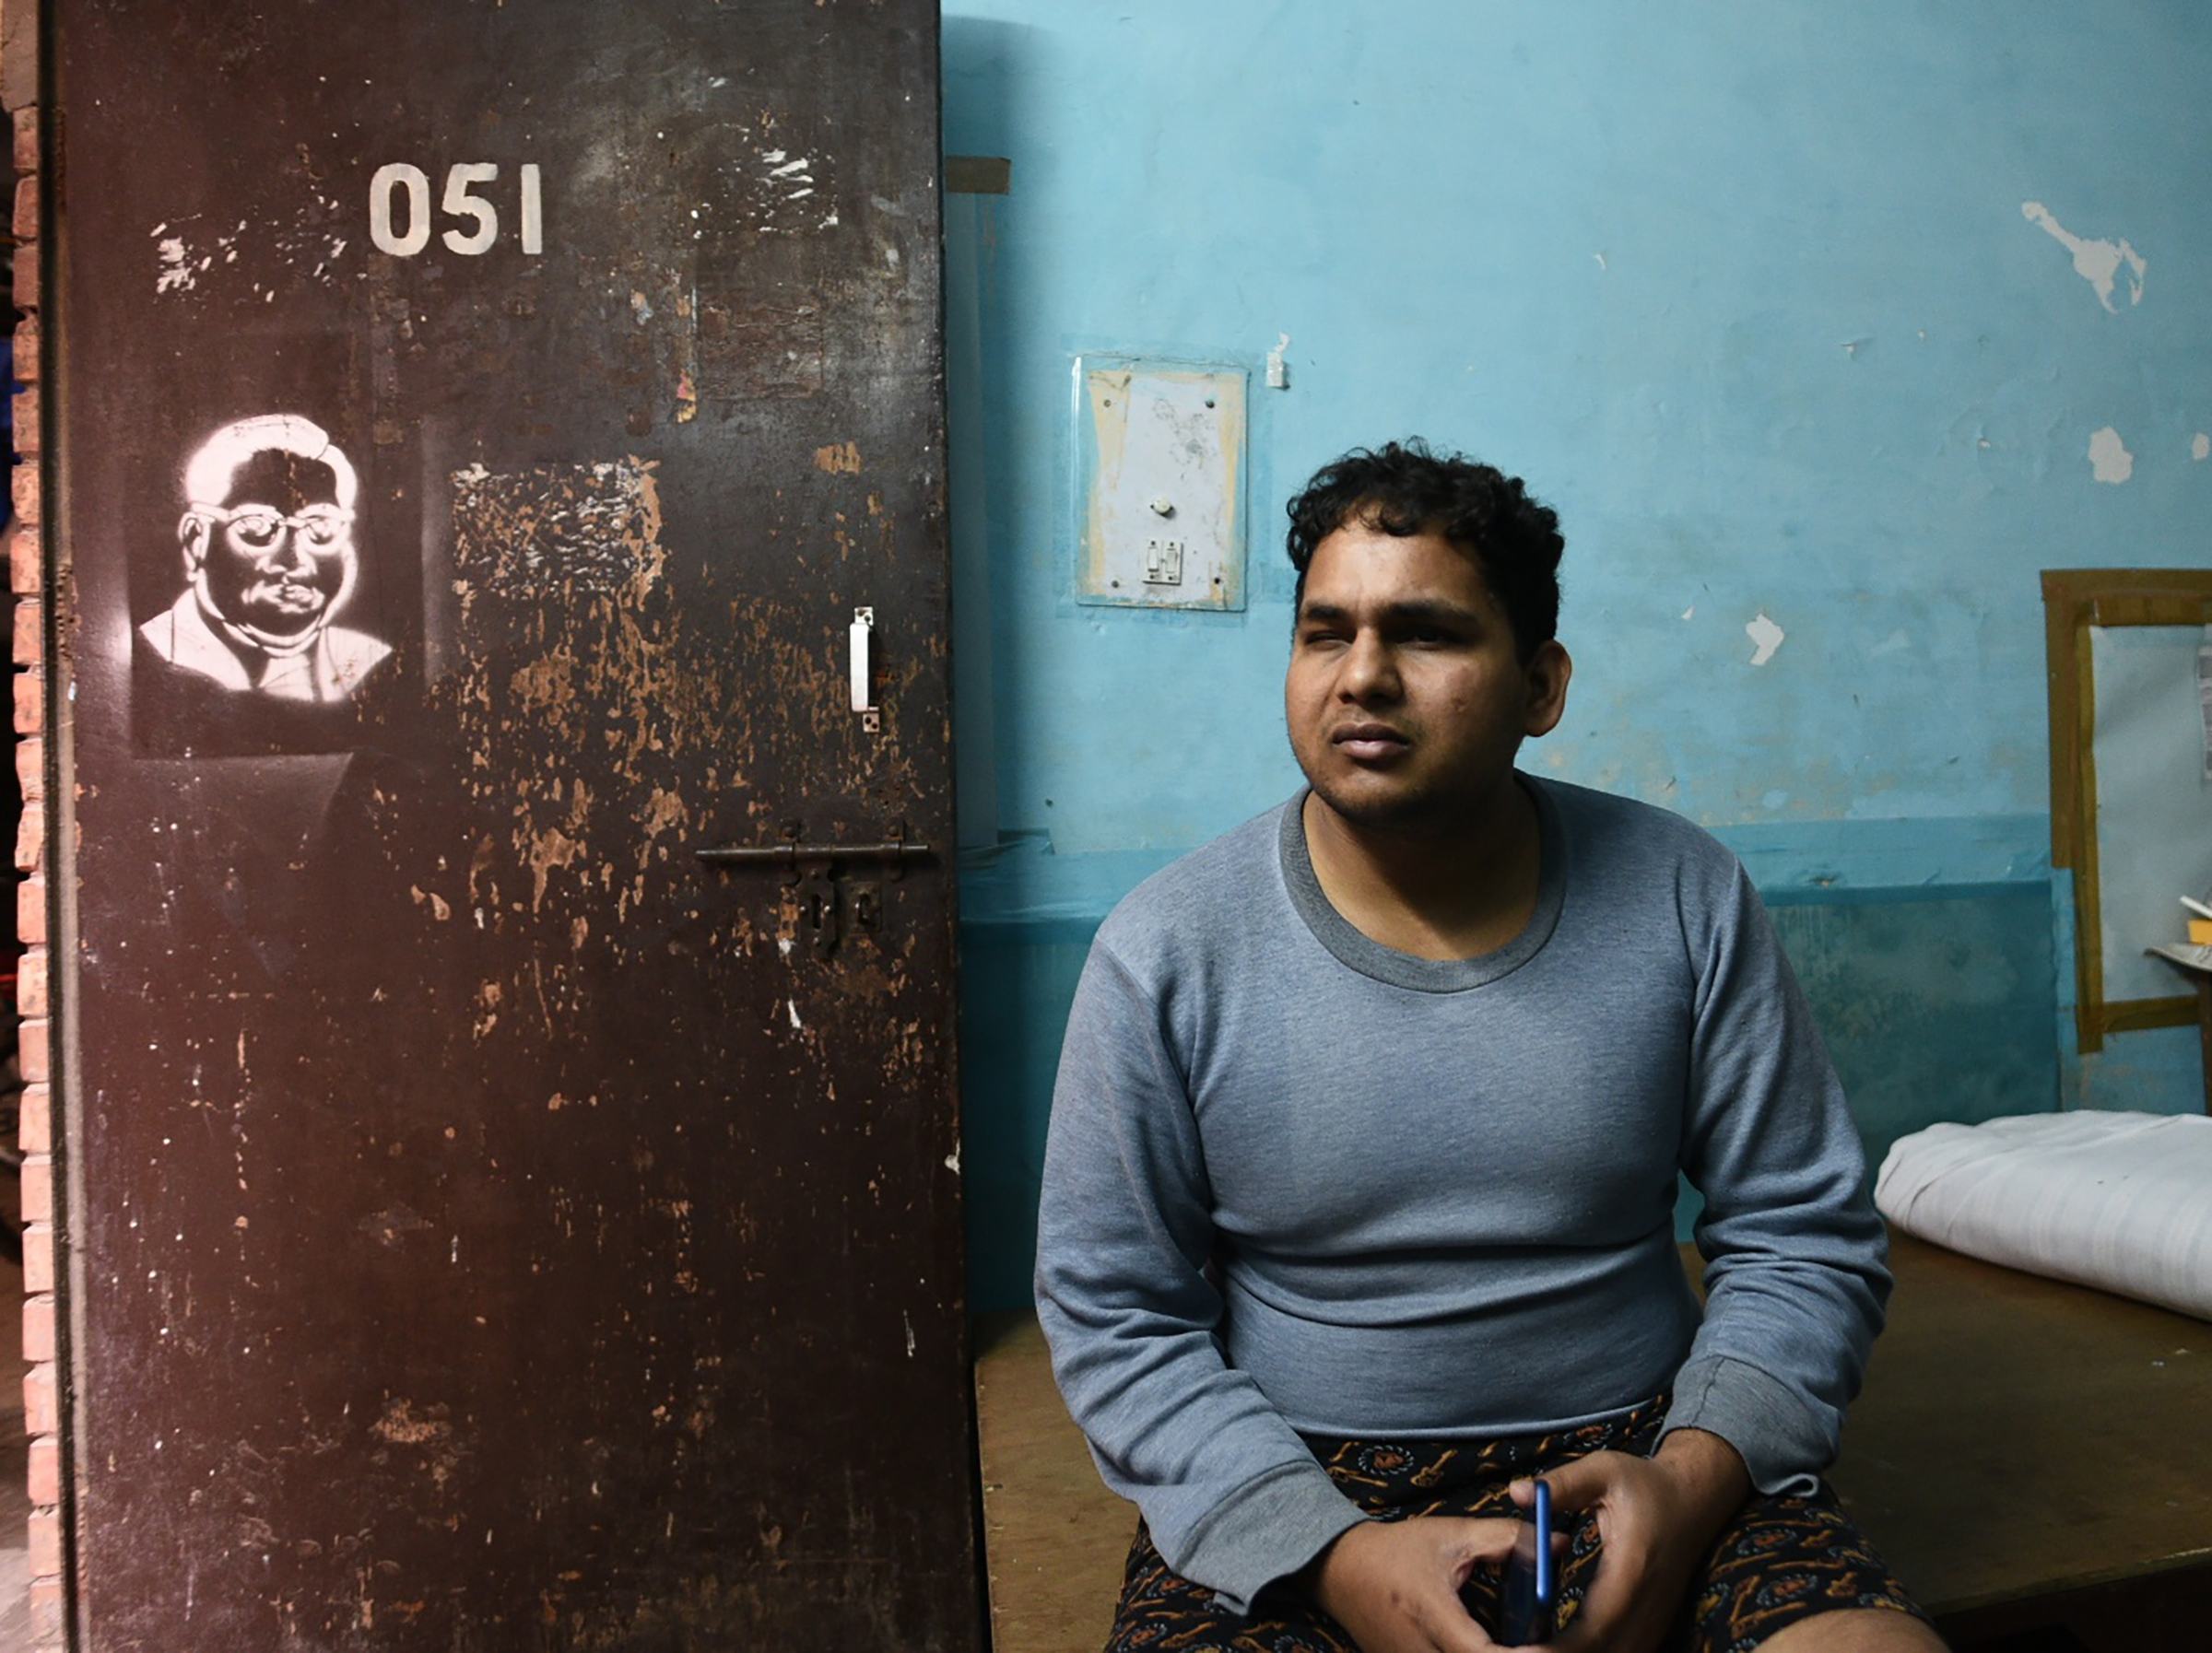 Suryaprakash, a blind research scholar pursuing an MPhil in Sanskrit, is seen sitting in his room at Sabarmati Hostel, Jawaharlal Nehru University (JNU), on Jan. 6, 2020 in New Delhi, India. He was also beaten up the day before during violence inside the campus. (Vipin Kumar—Hindustan Times via Getty Images)